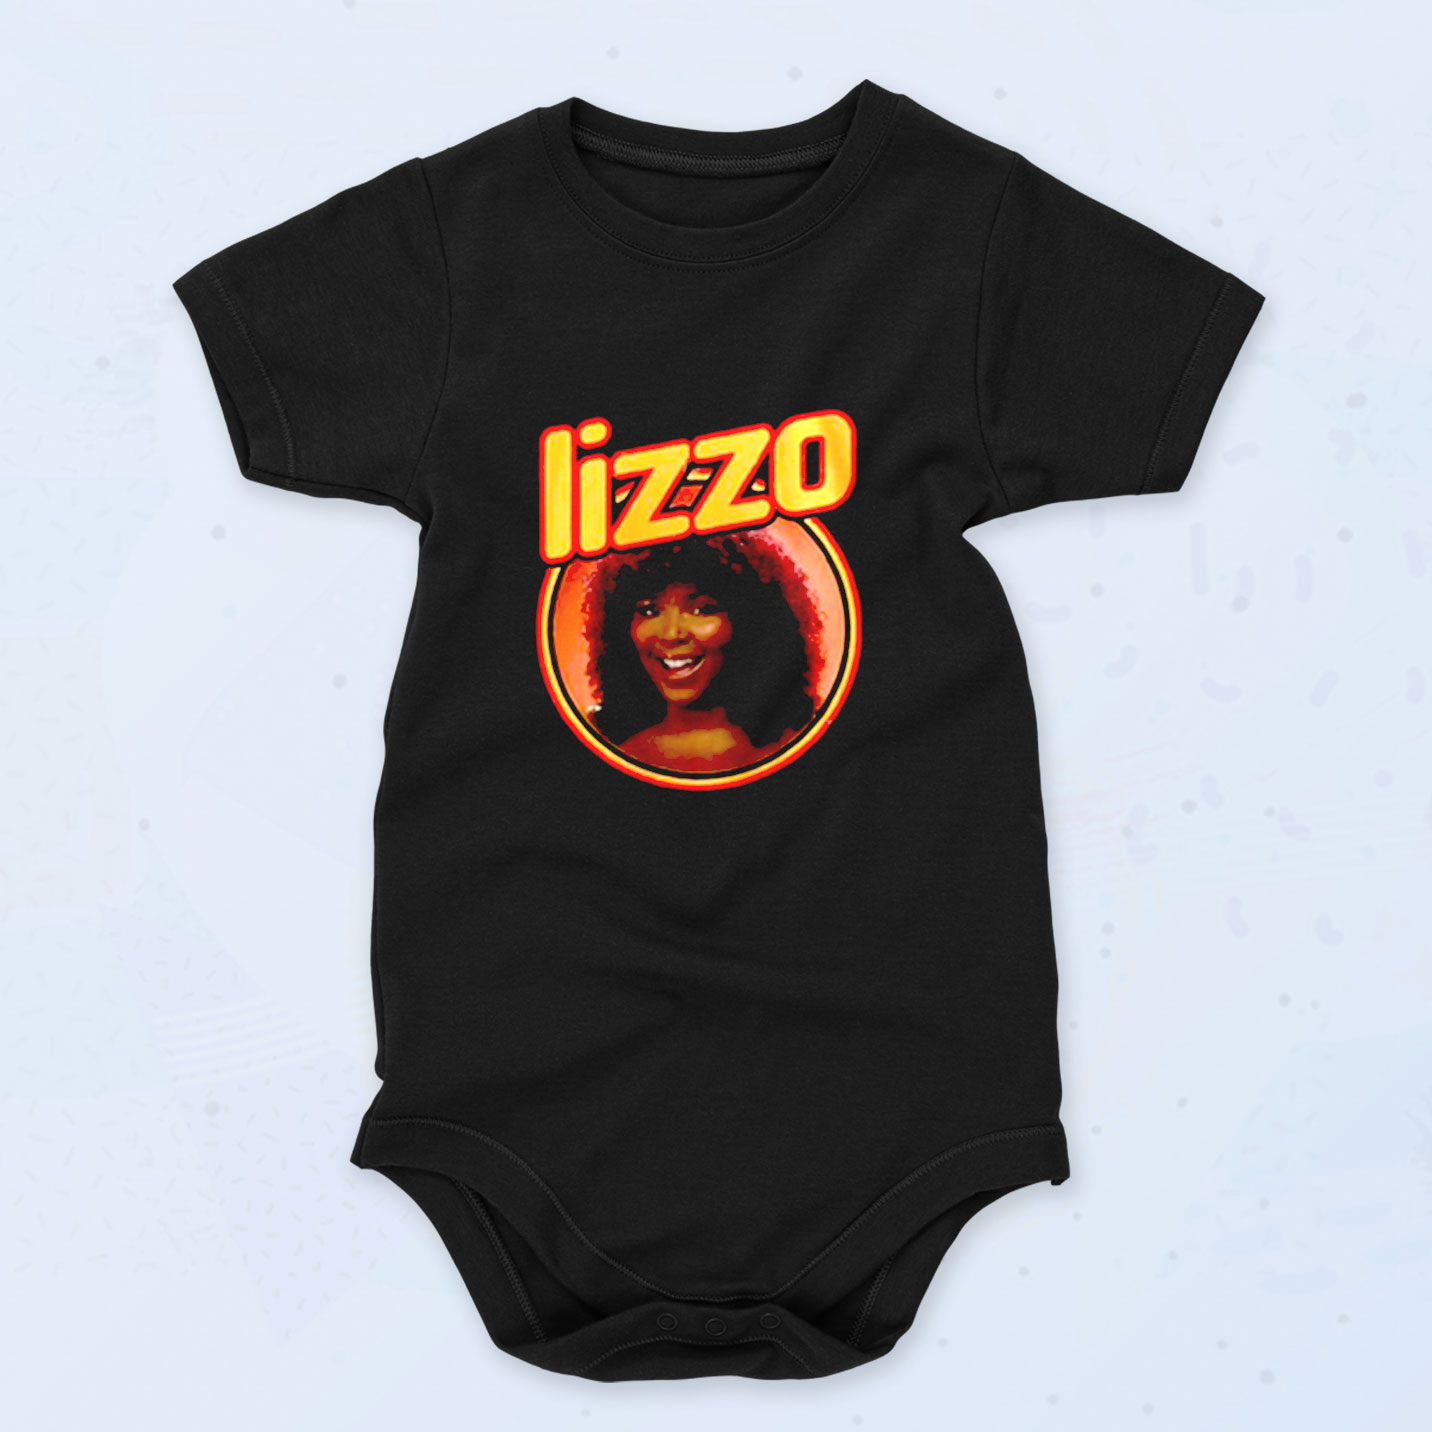 https://www.90sclothes.com/wp-content/uploads/2020/08/Lizzo-Juice-Girl-Rapper-Baby-Onesies-Style.jpeg